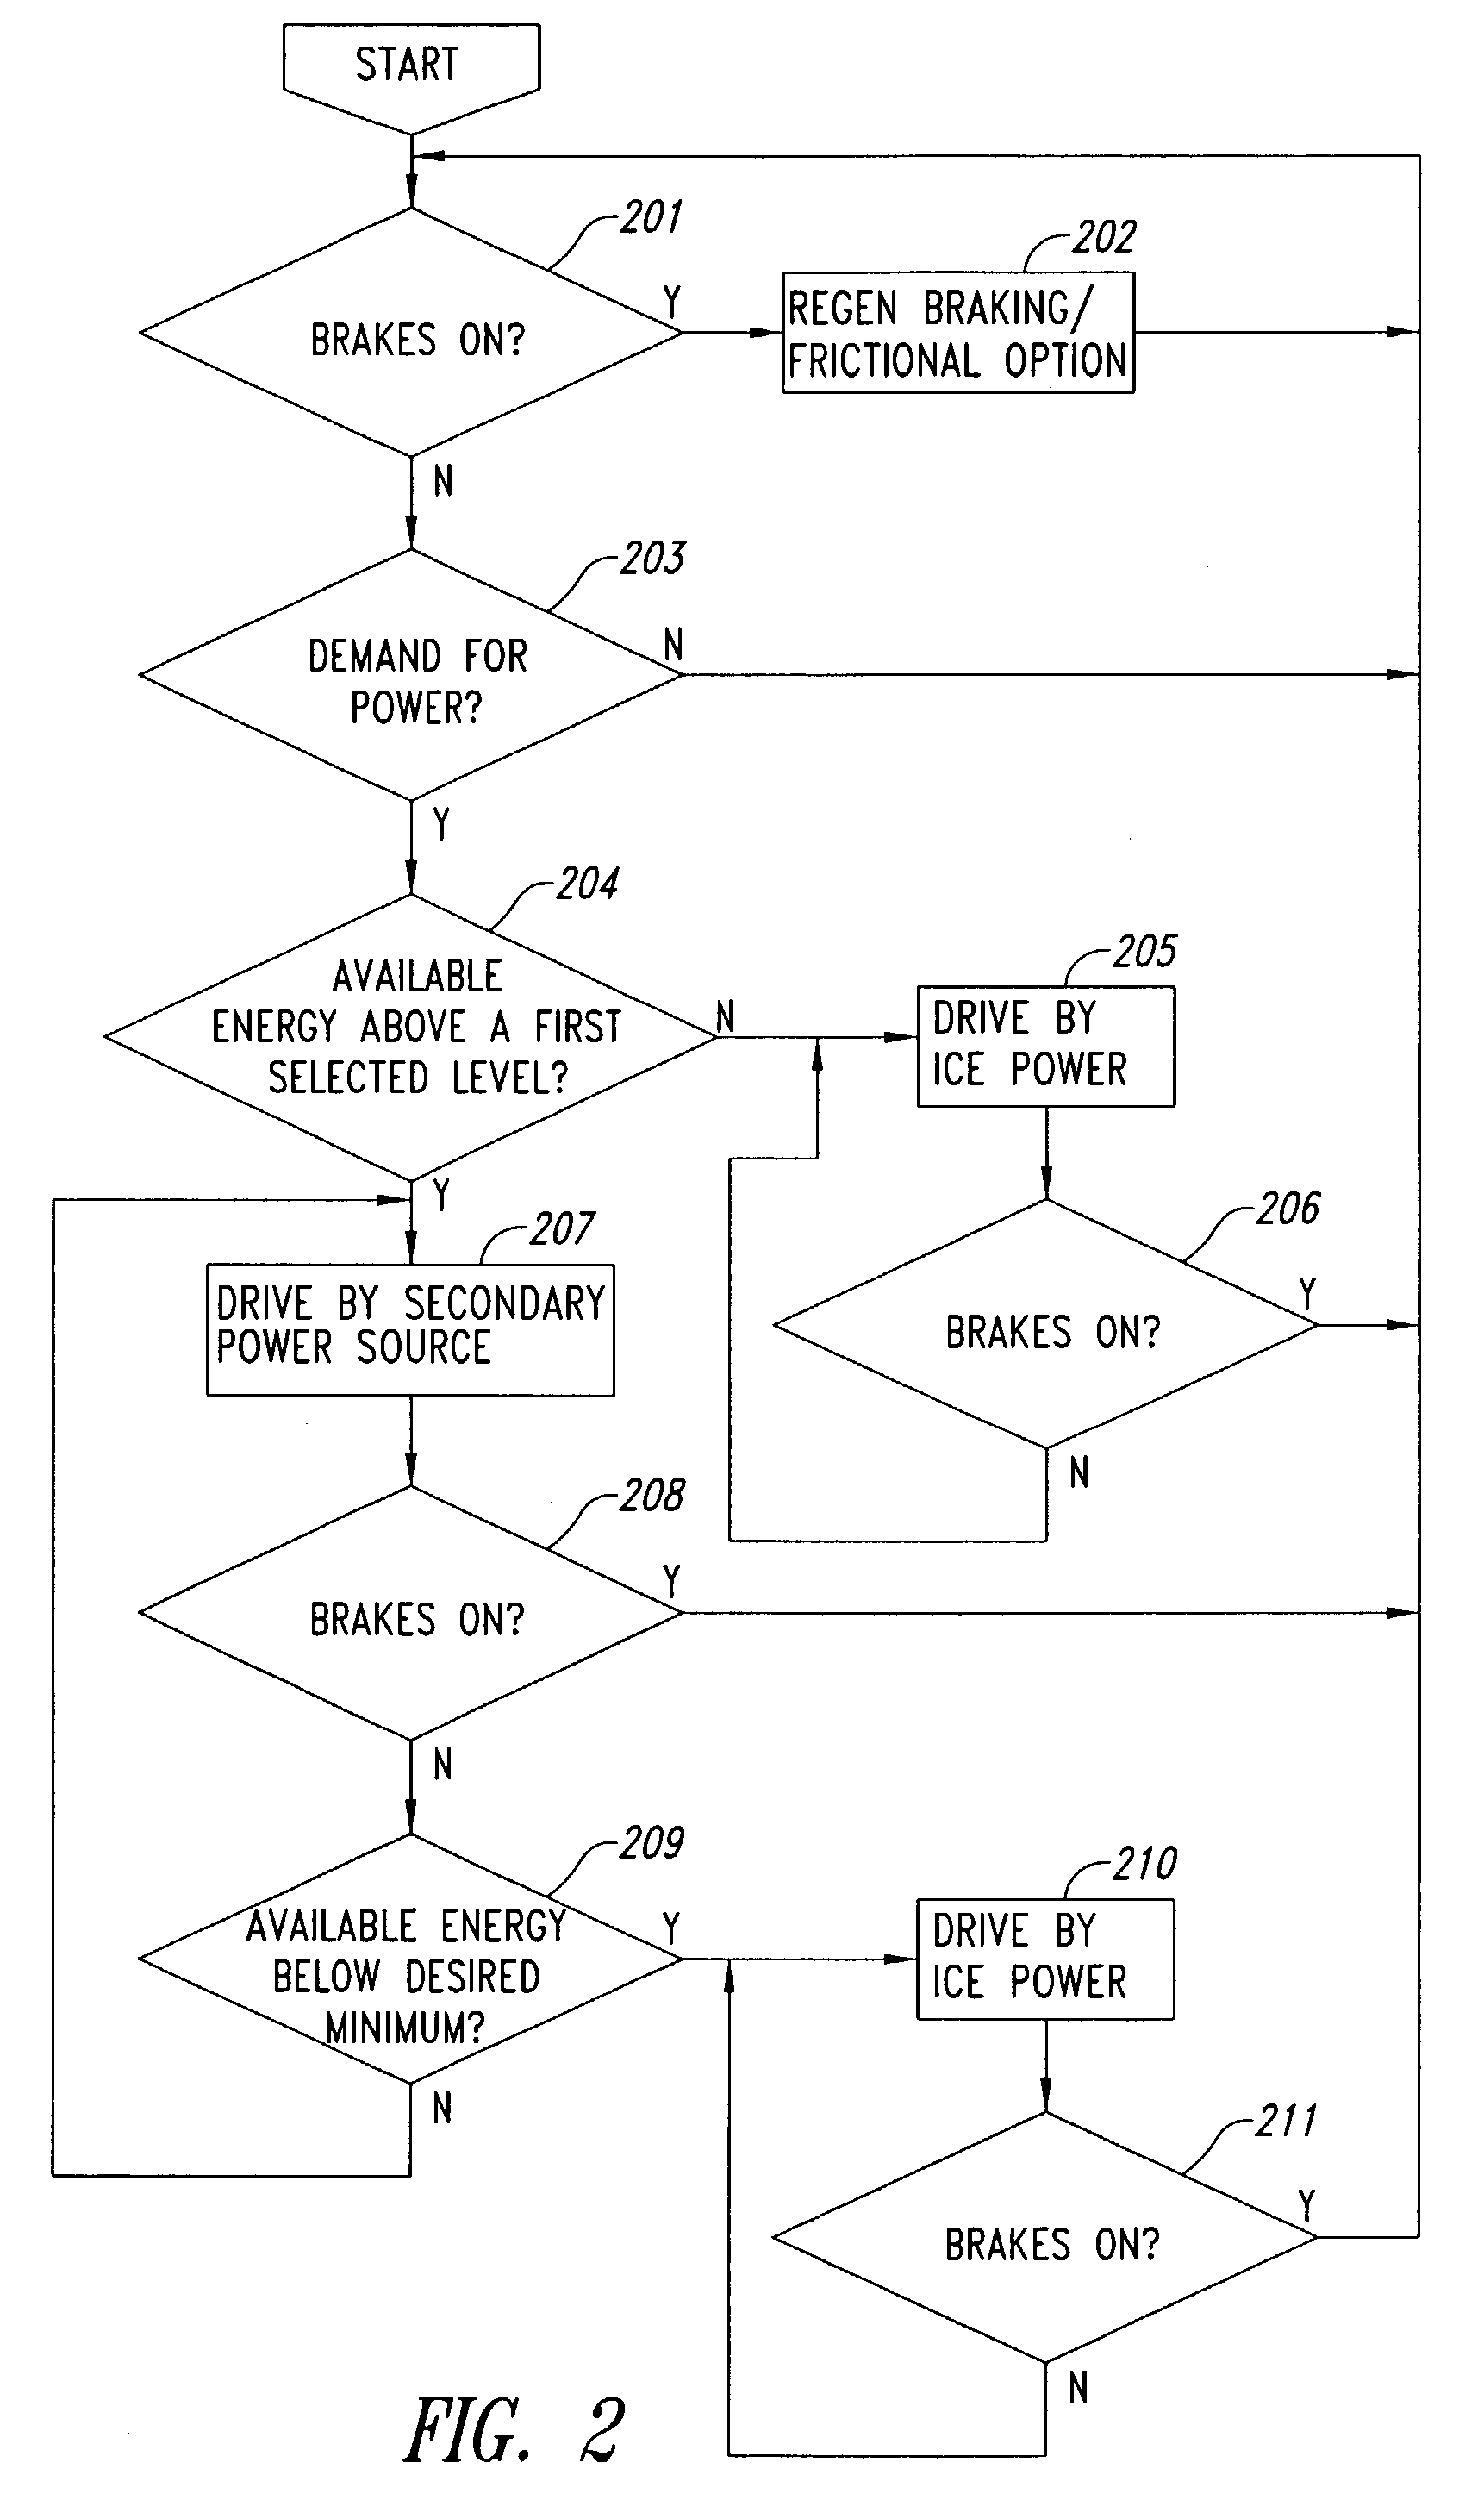 Methods of operating a parallel hybrid vehicle having an internal combustion engine and a secondary power source